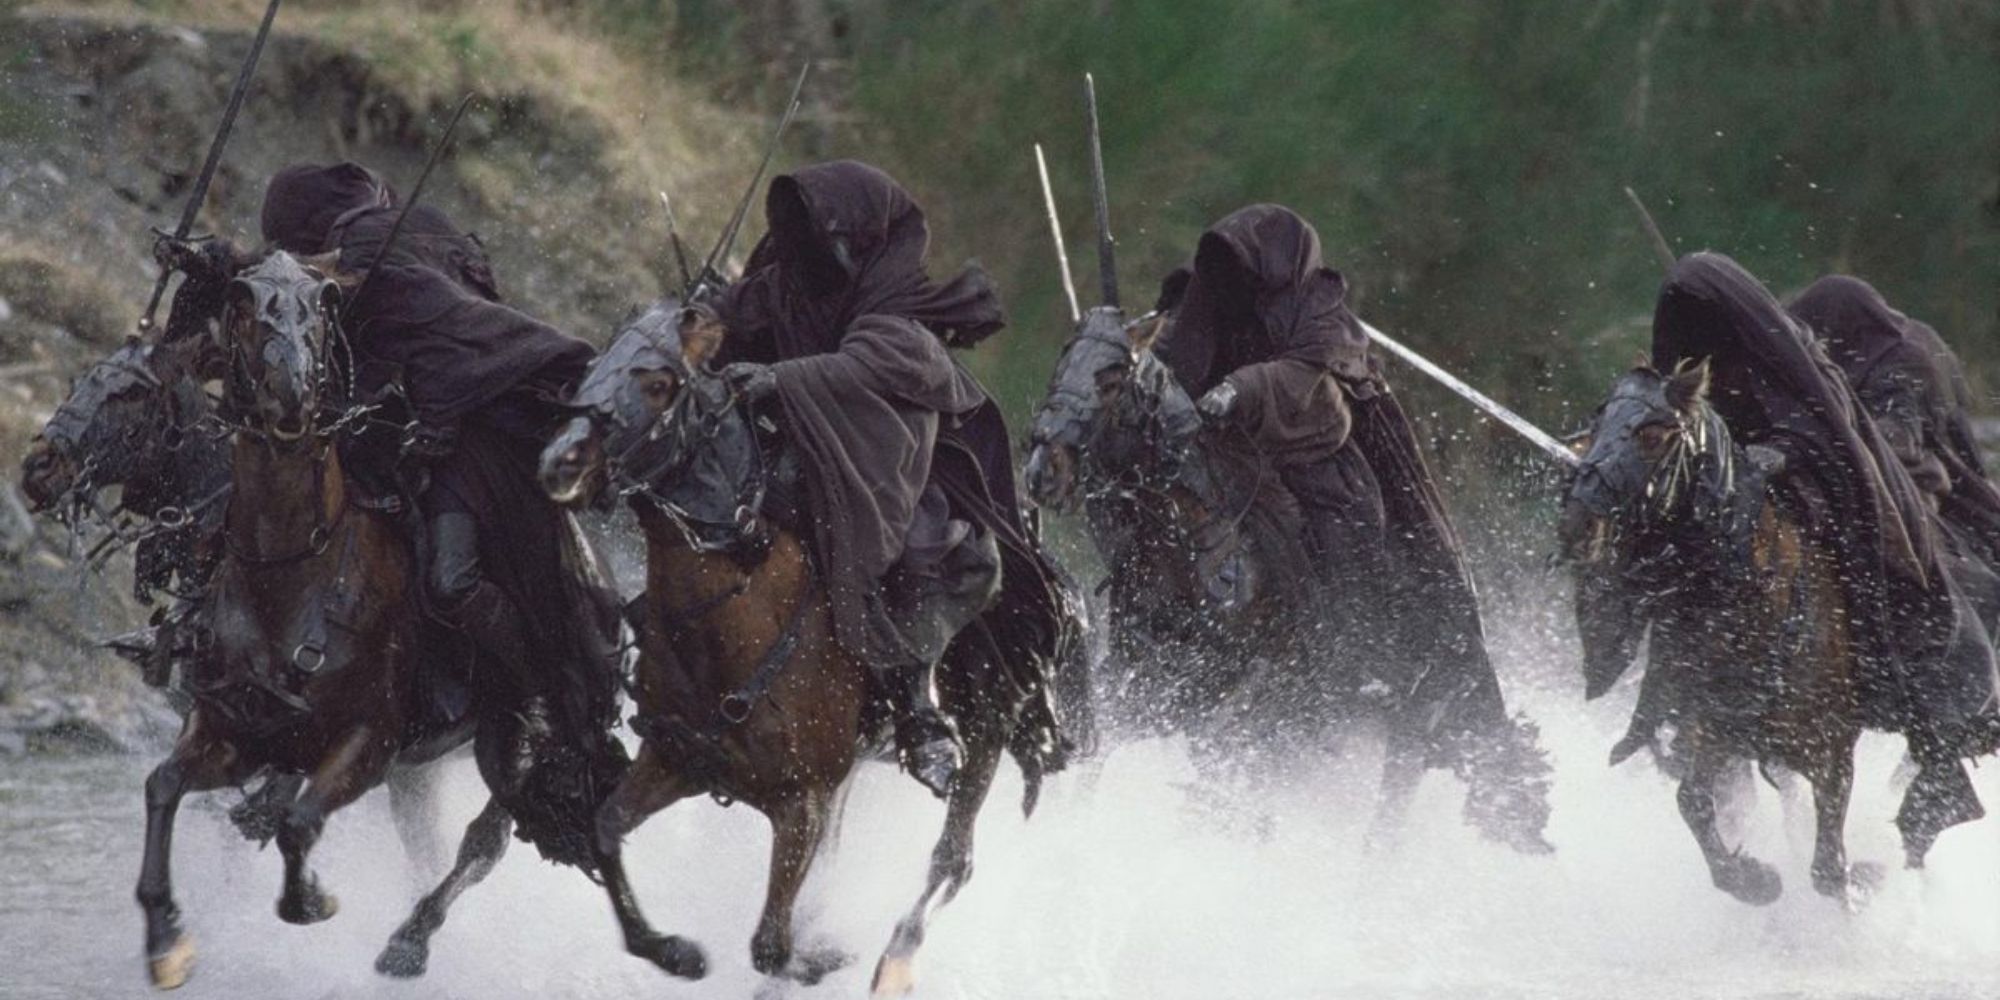 Nazgul in The Lord Of The Rings